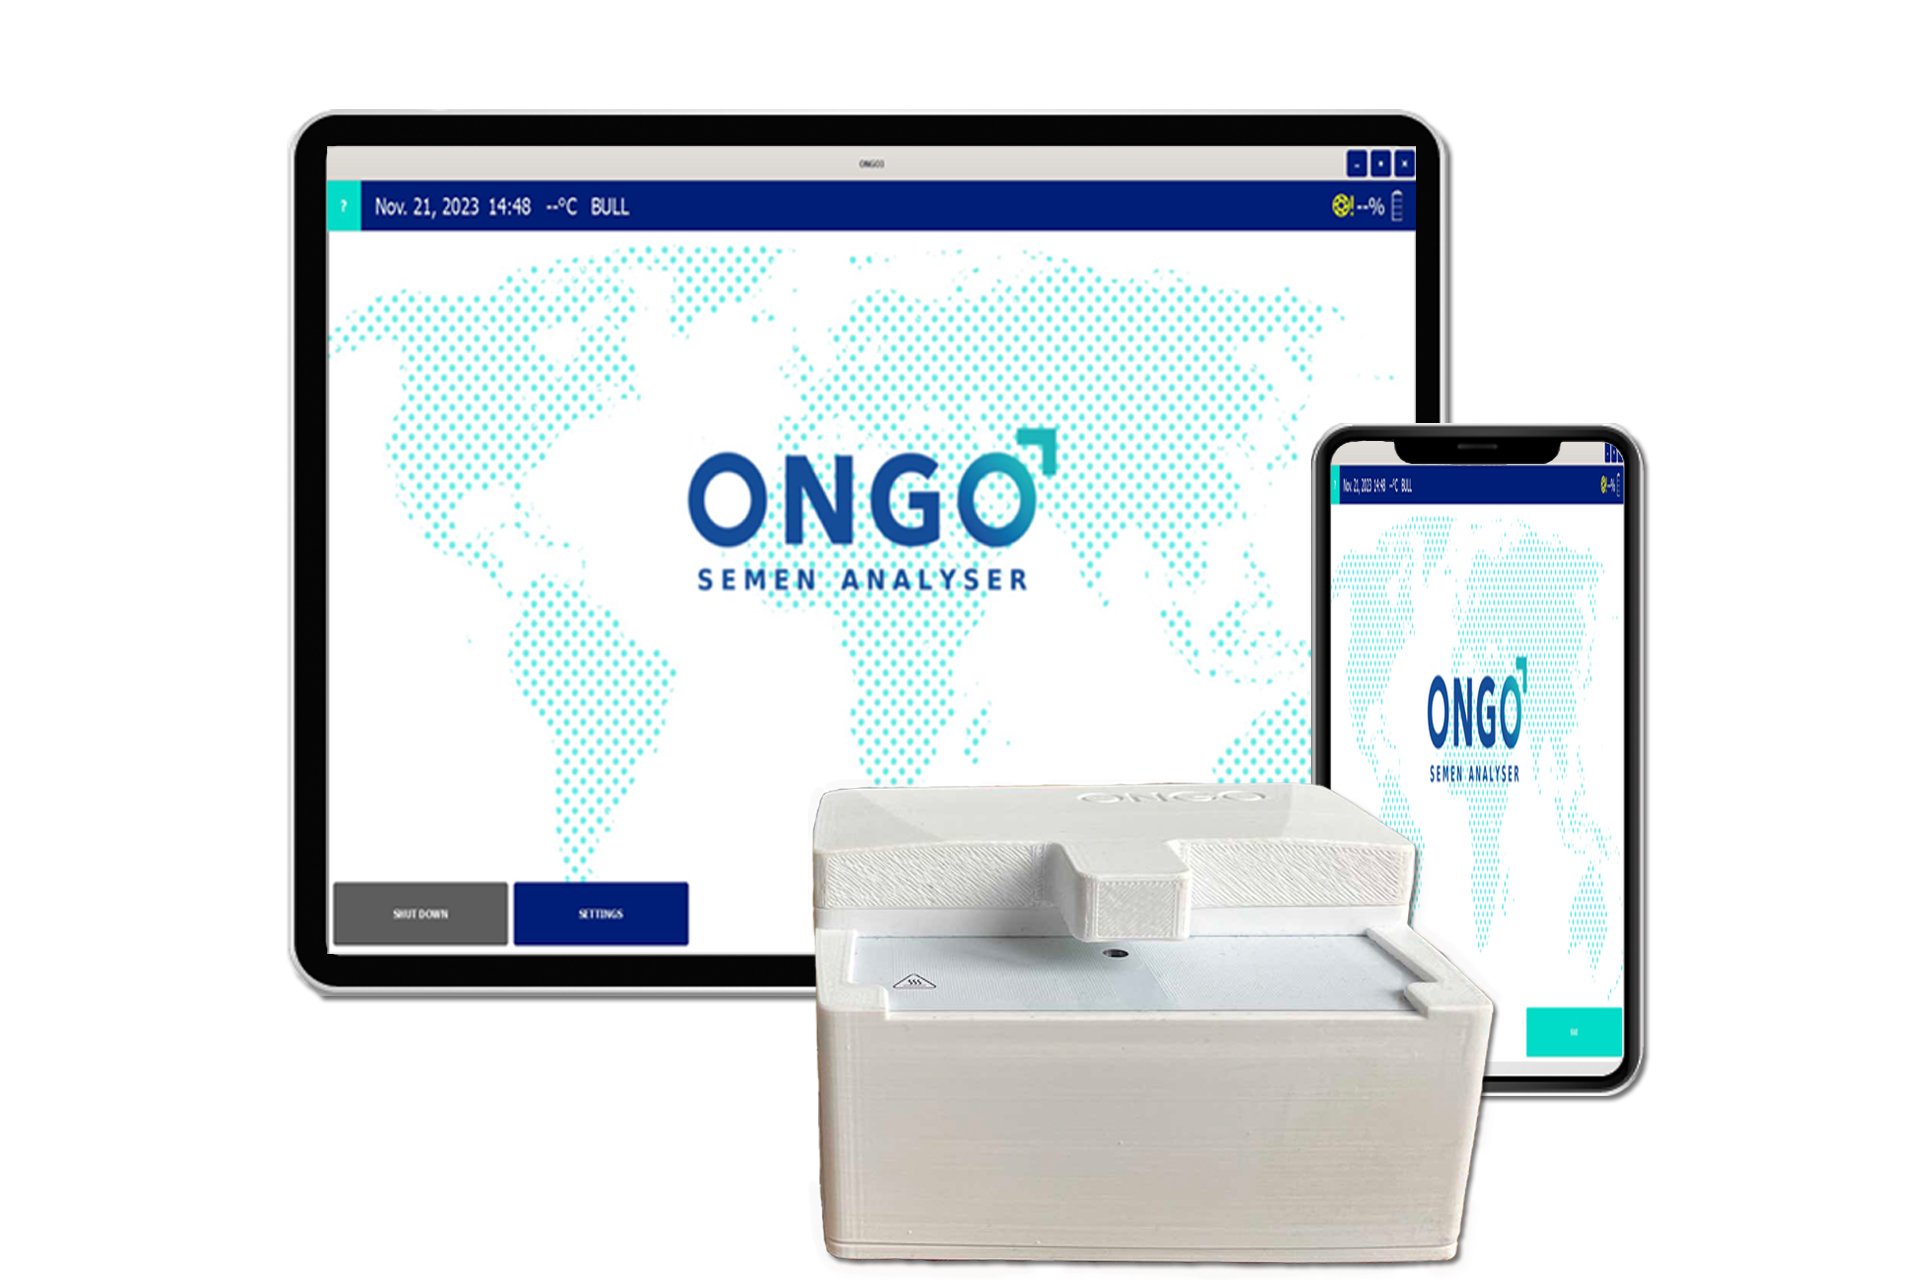 ONGO VISION mobile sperm analysing unit with smartphone and tablet by ONGOVETTECH Ltd.